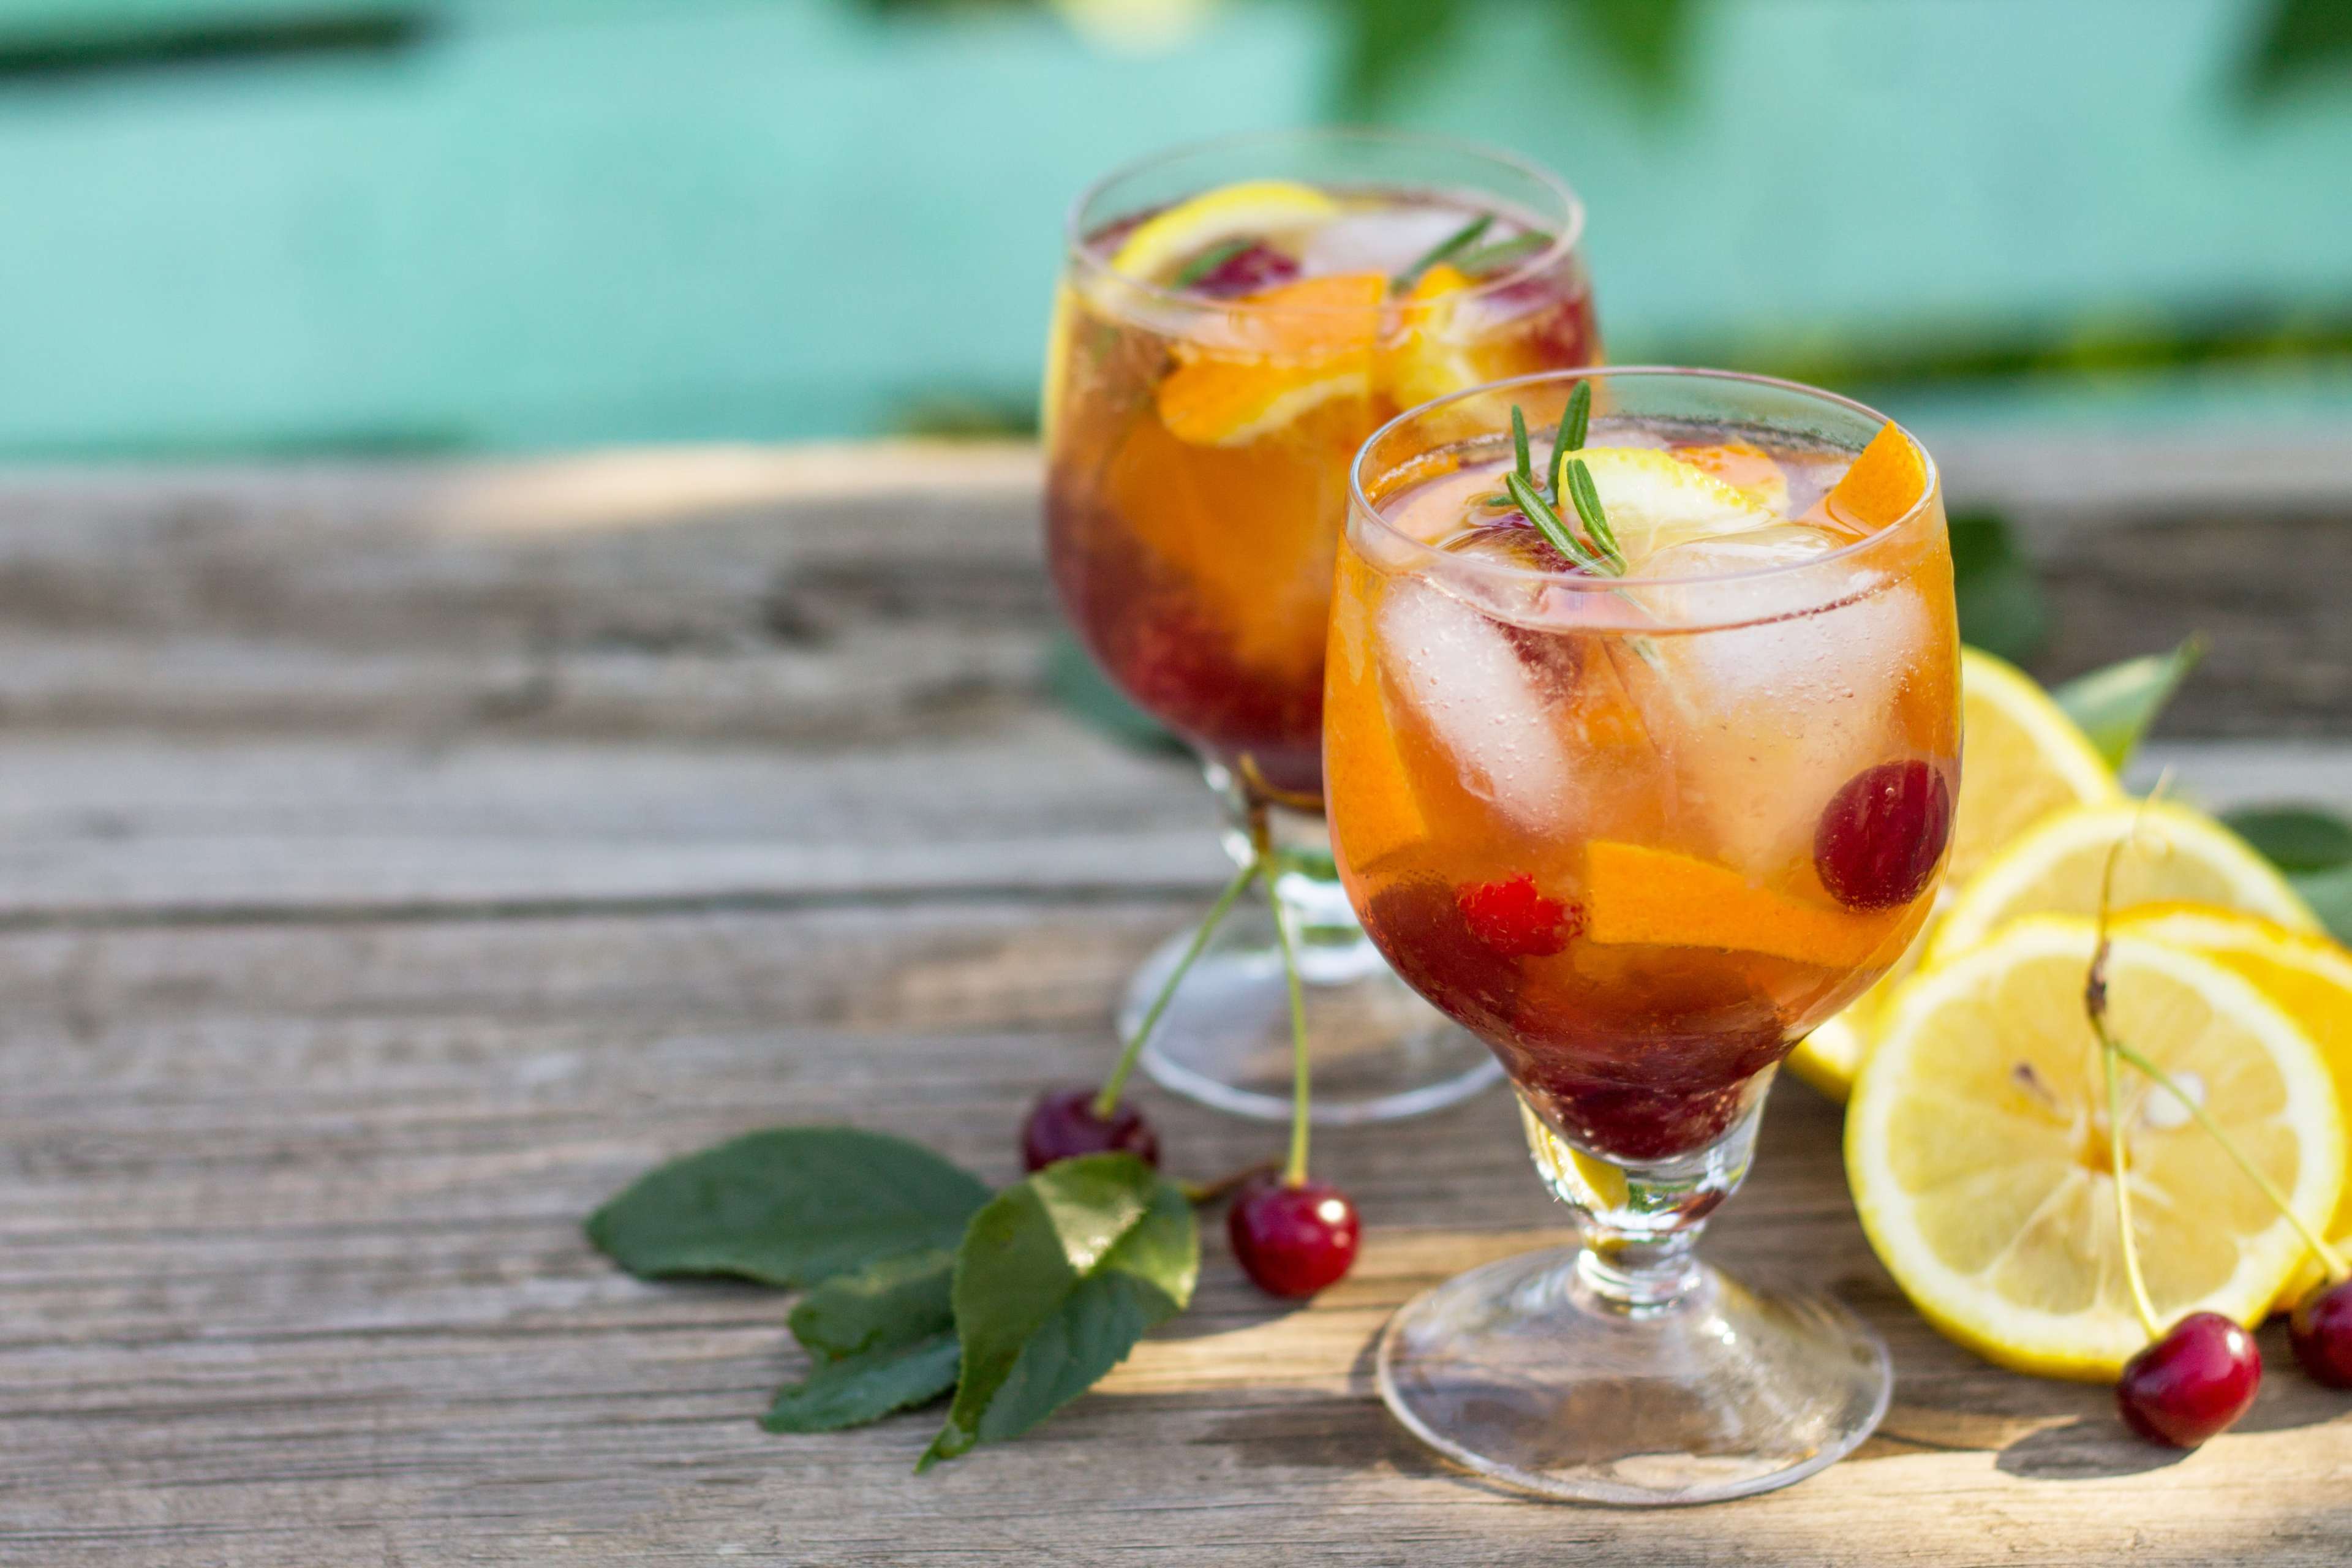 61bccdd3e2f42a7437db47f5_wine%20sangria%20or%20punch%20with%20fruits.jpeg